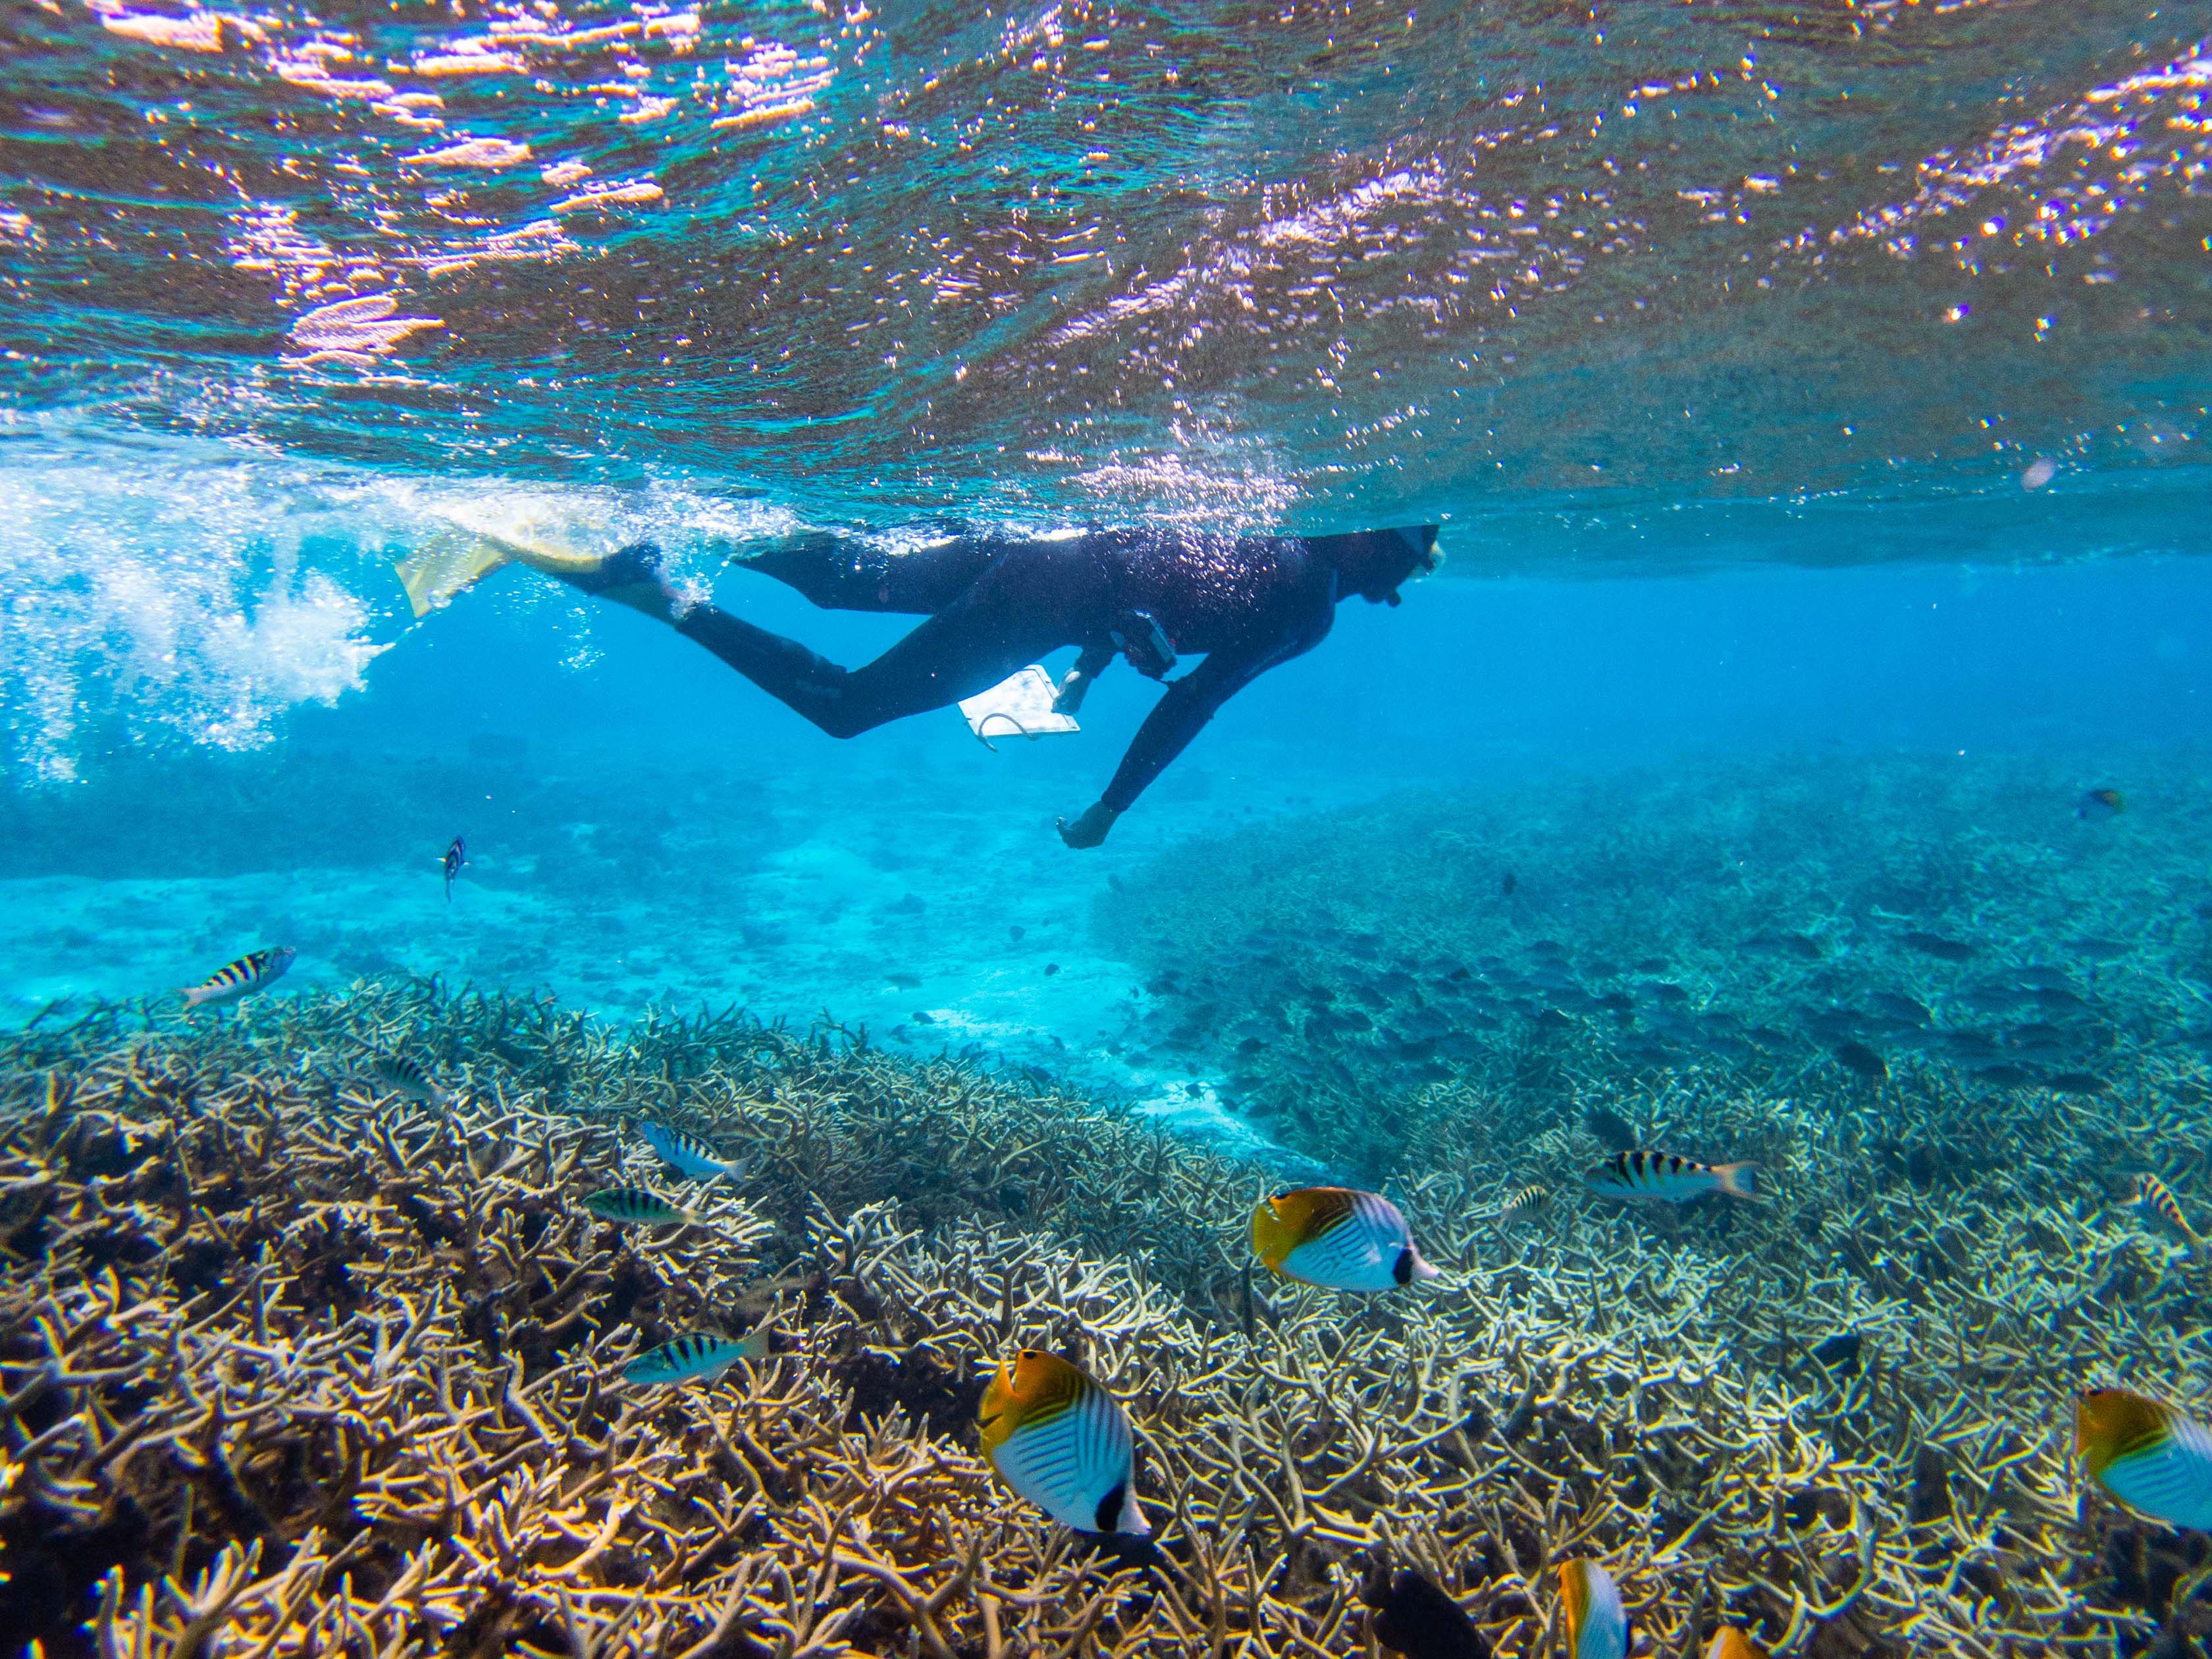 Diver swimming on the ocean surface and above beautiful coral and fish